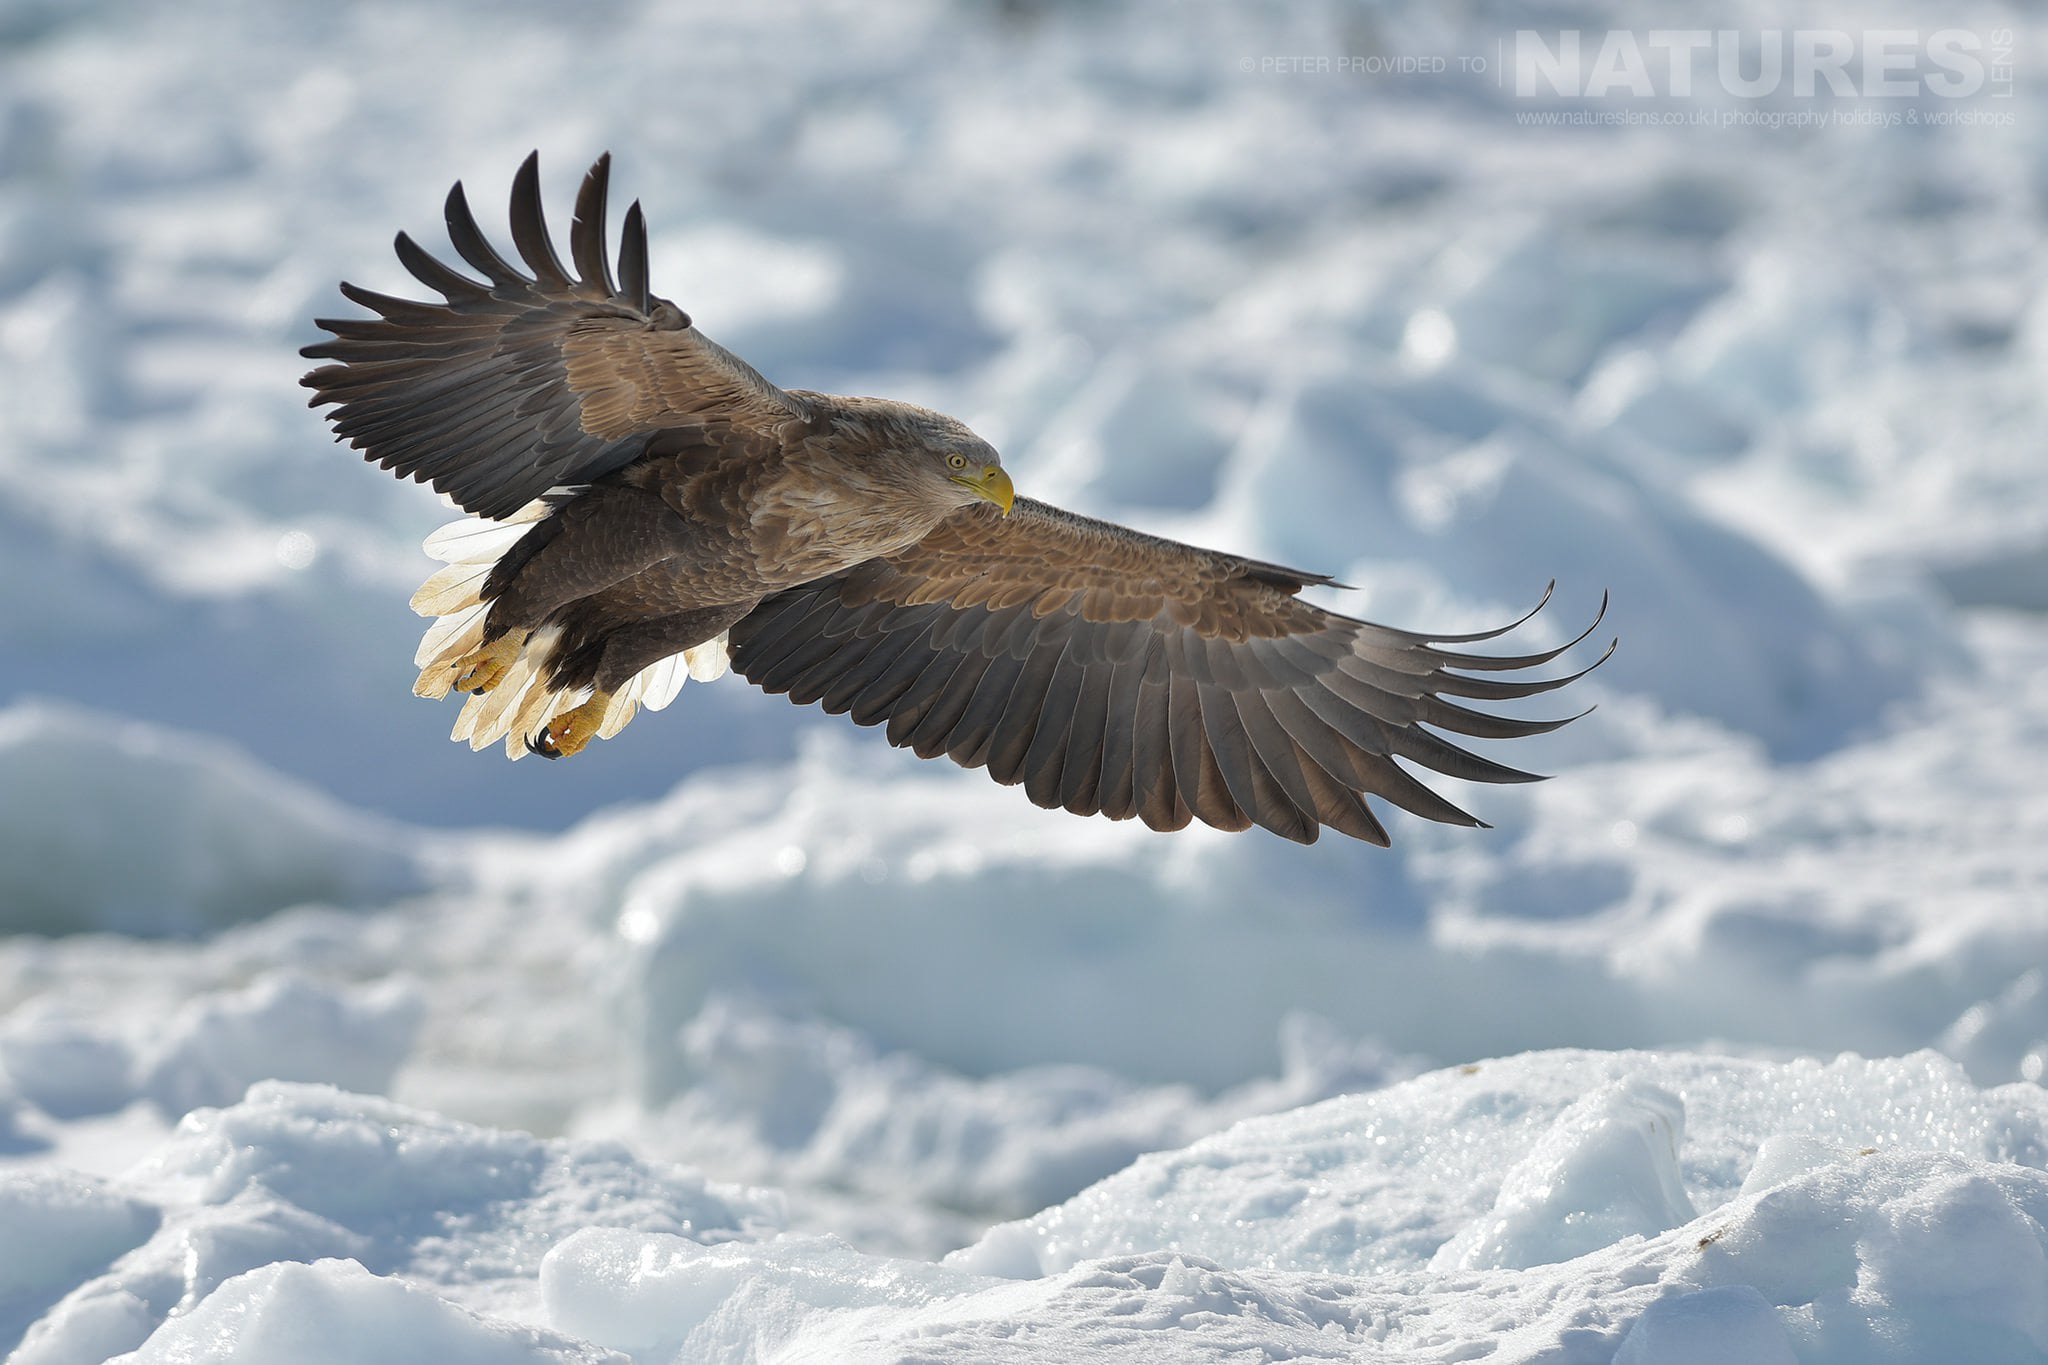 A White Tailed Sea Eagle Flies Over The Frozen Pack Ice This Image Was Captured On The Island Of Hokkaido During The Natureslens Winter Wildlife Of Japan Photography Holiday